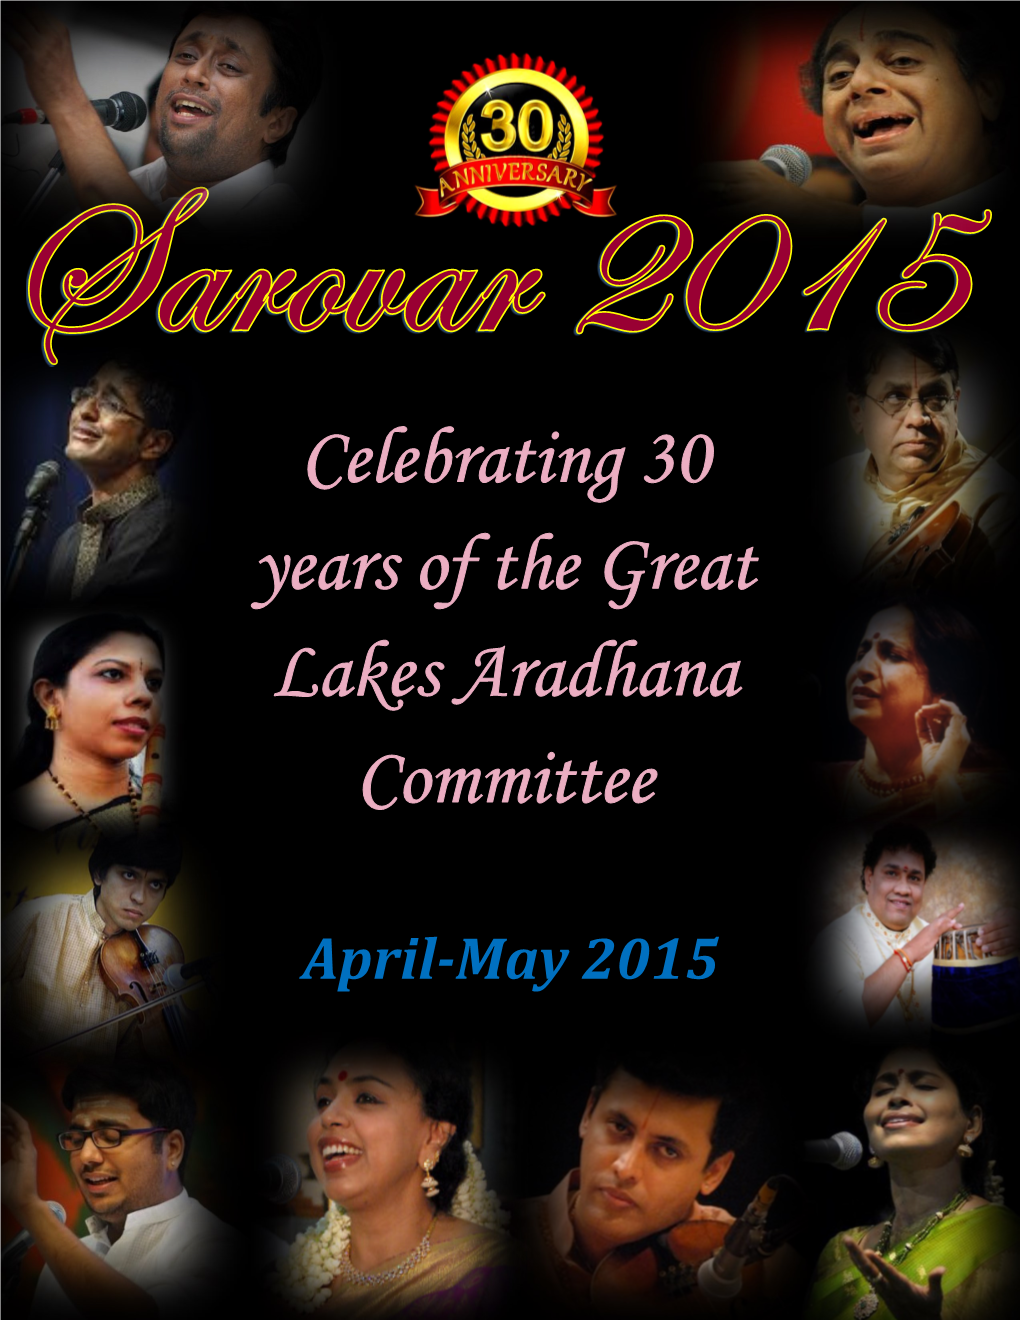 Celebrating 30 Years of the Great Lakes Aradhana Committee